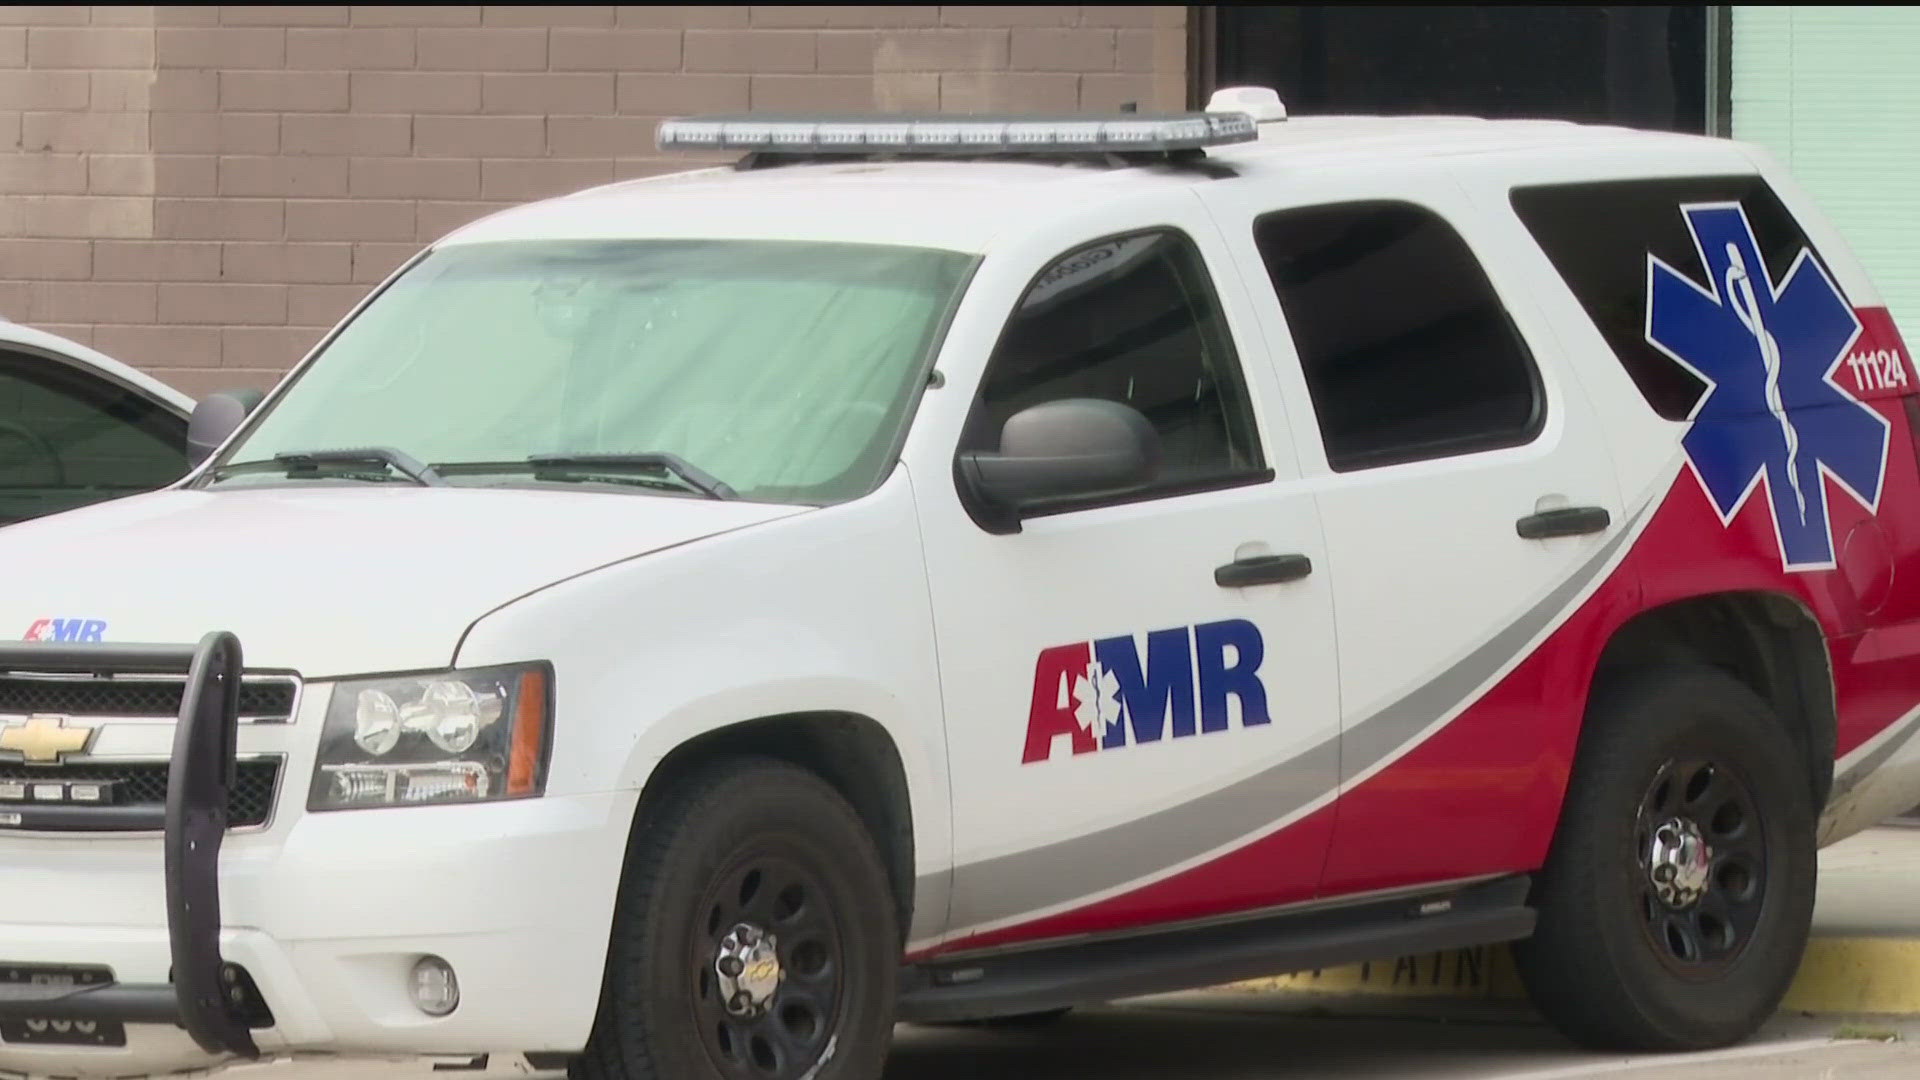 Brookhaven city officials are still petitioning over ambulance response times, begging the county to allow them to manage their own operations.